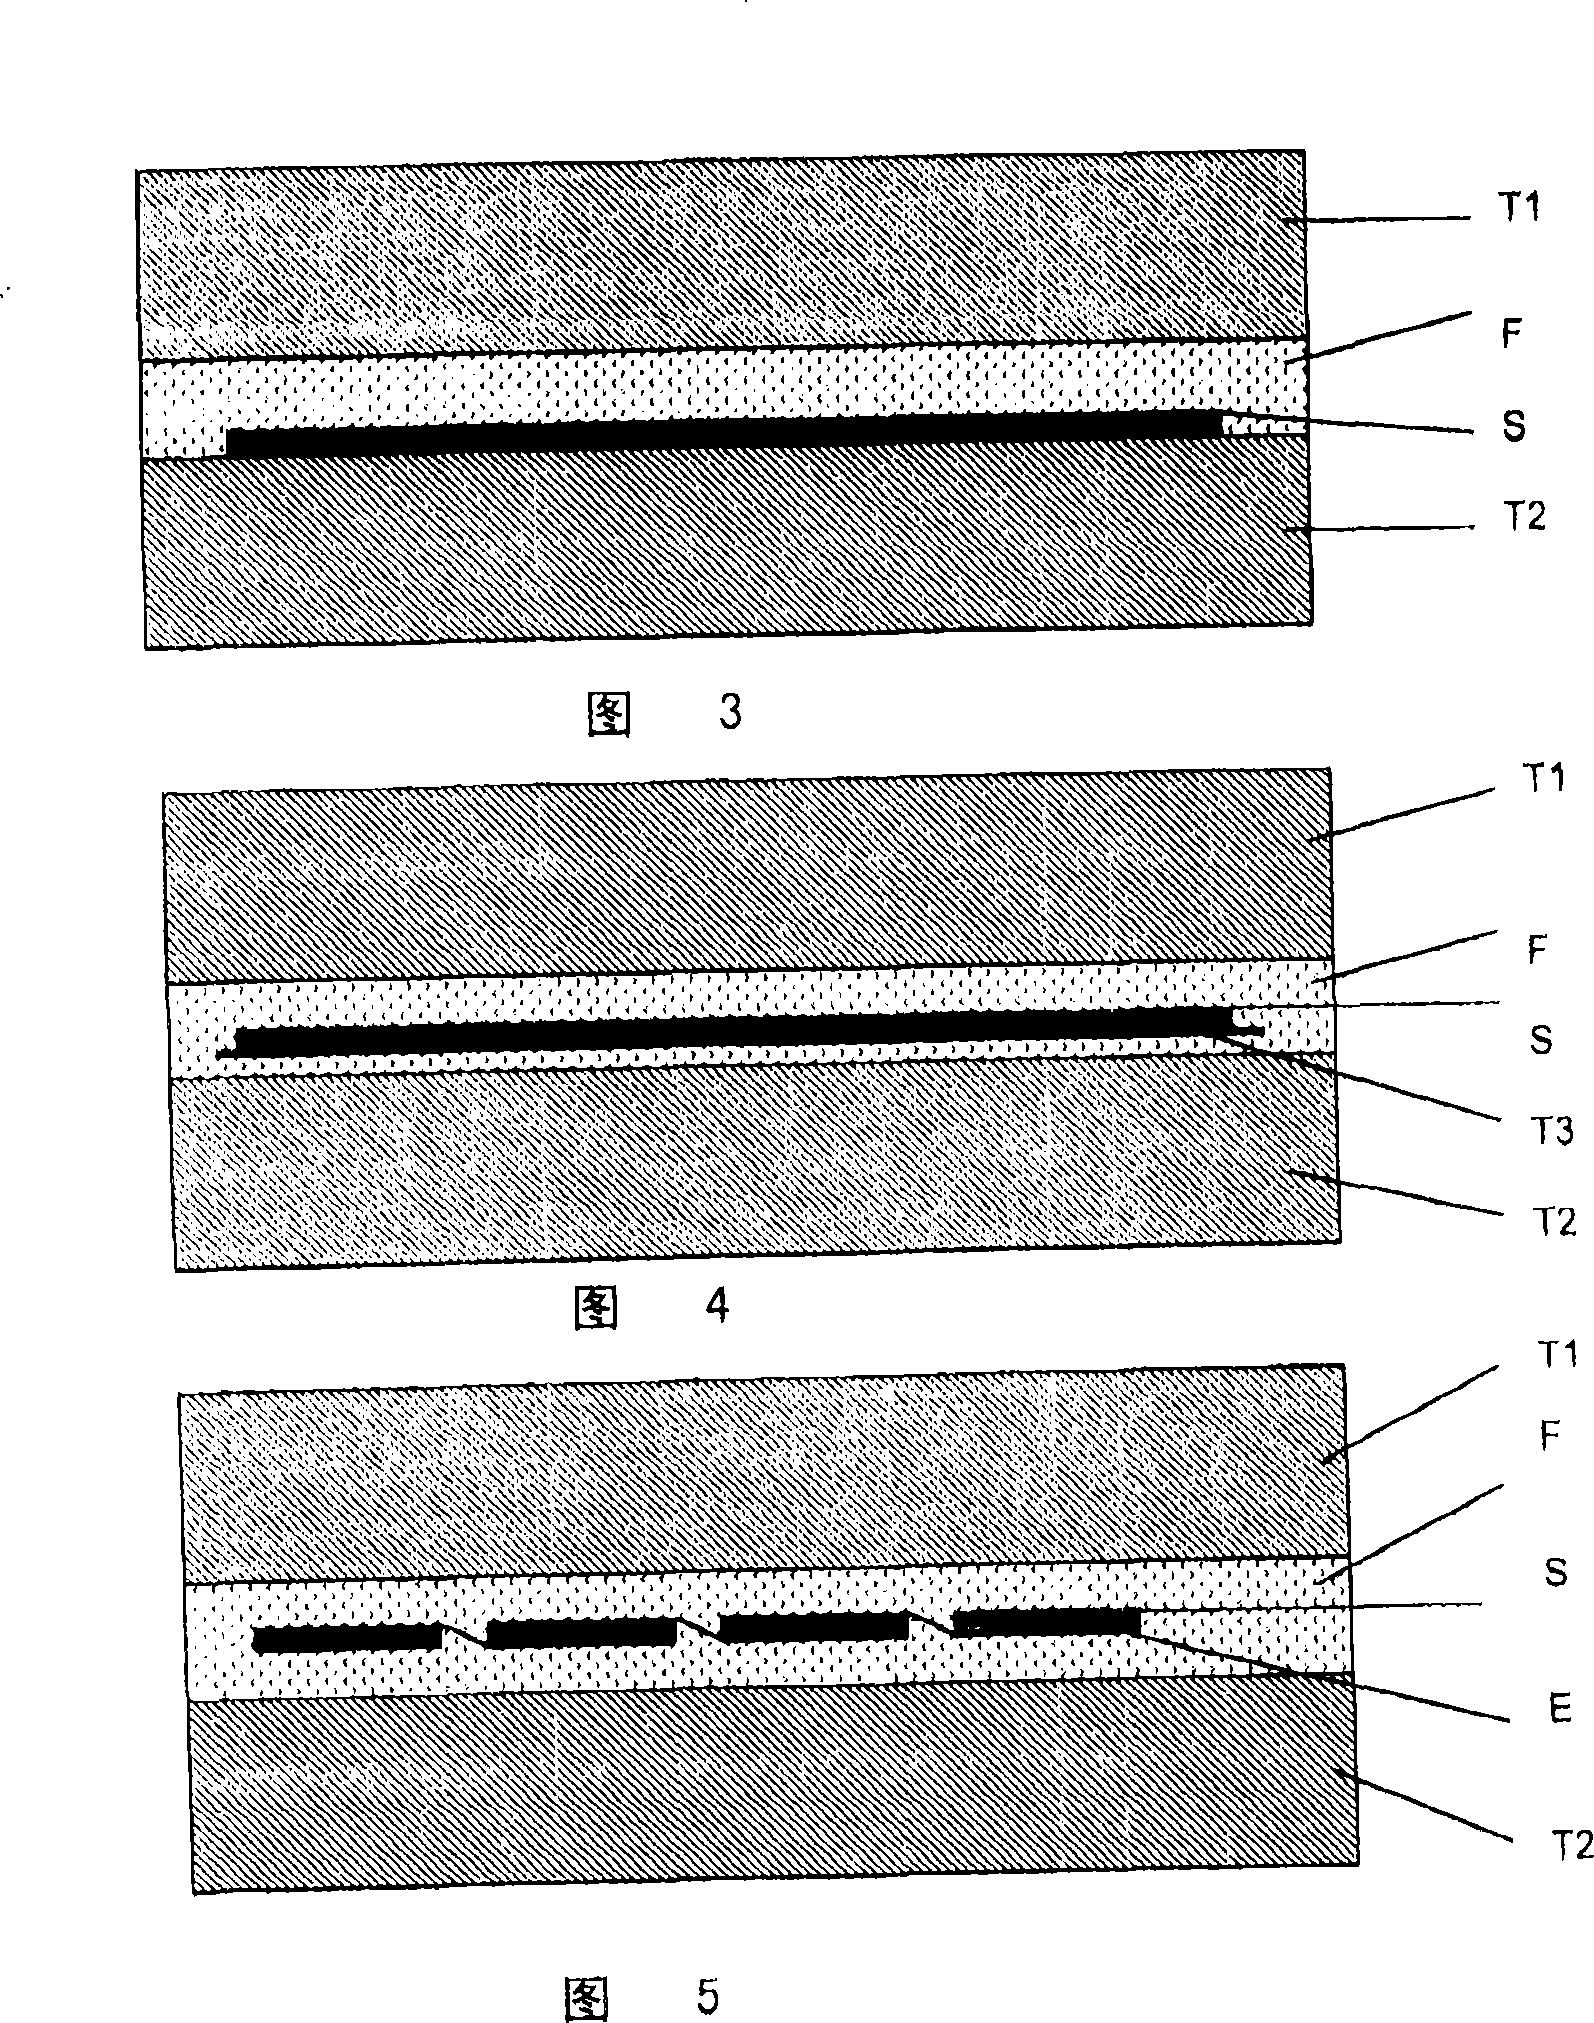 Method of producing solar modules by the roller laminate process